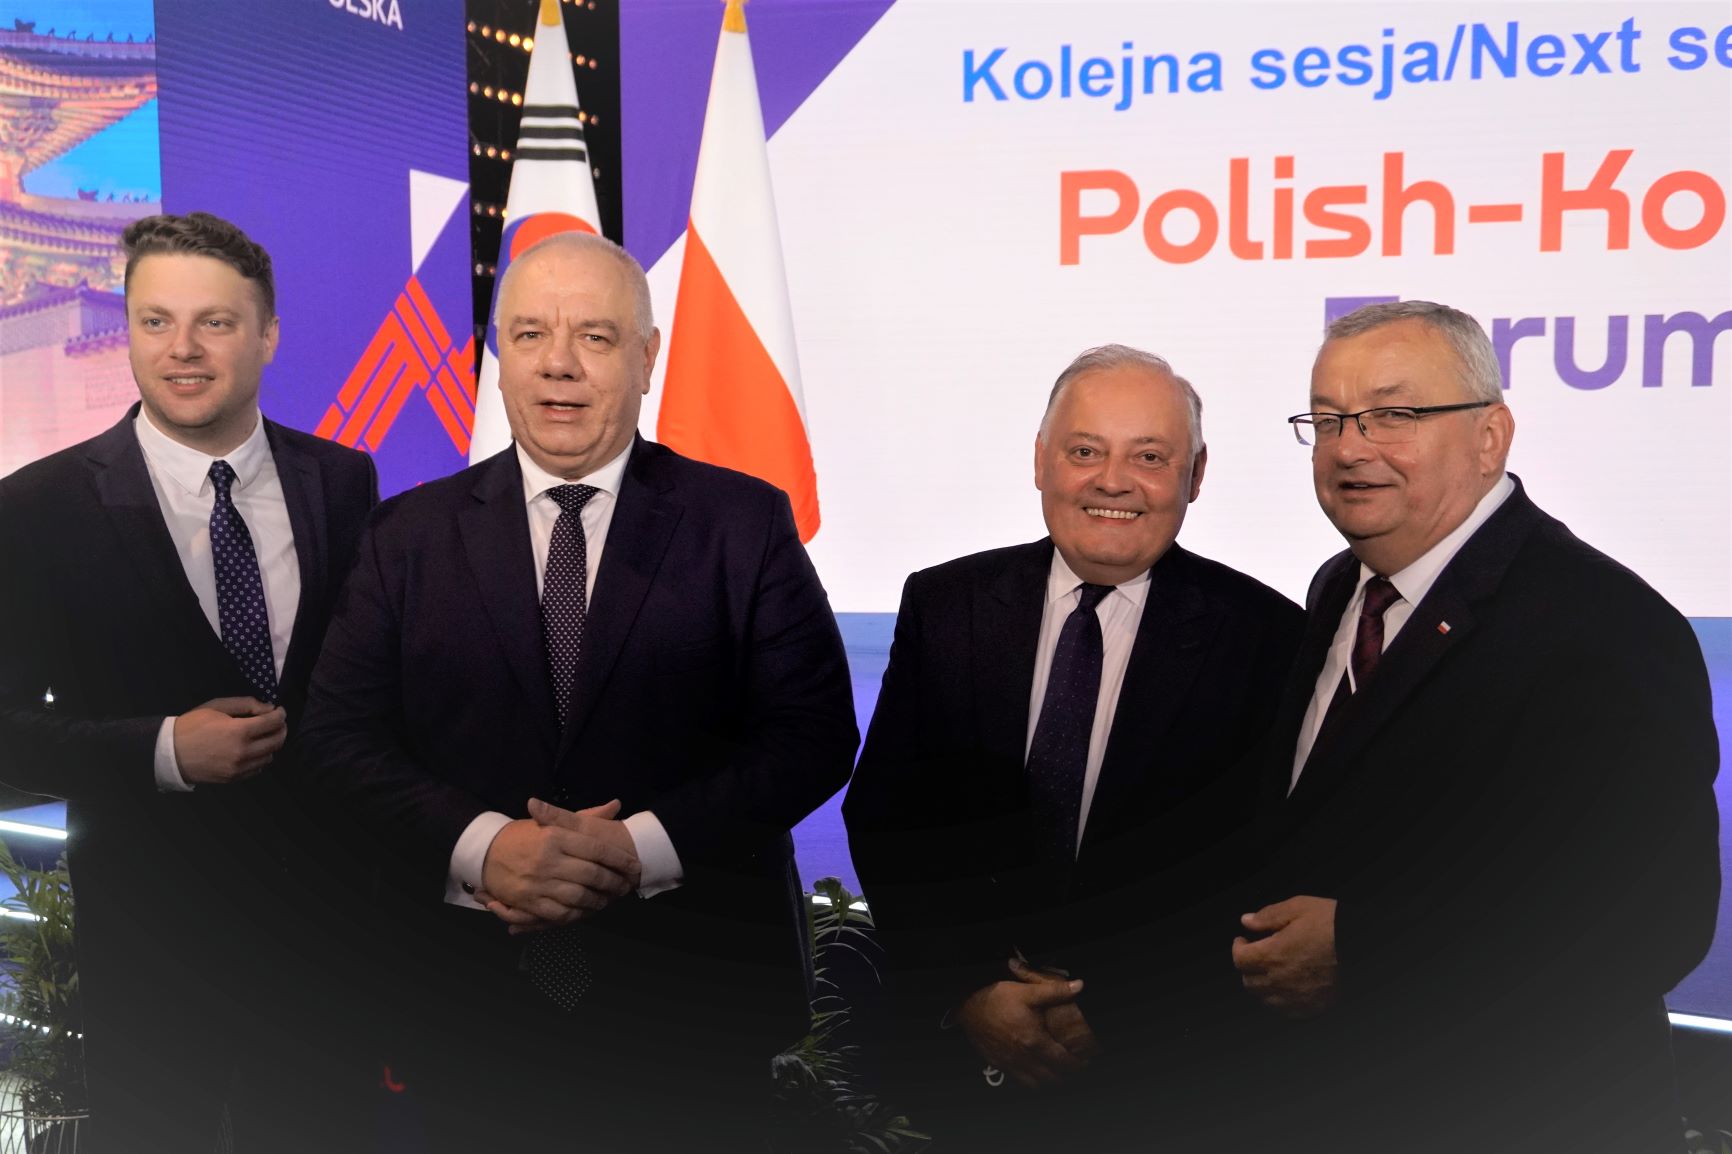 PGE: Nuclear power at Korean-Polish Forum during Krynica Congress 2023